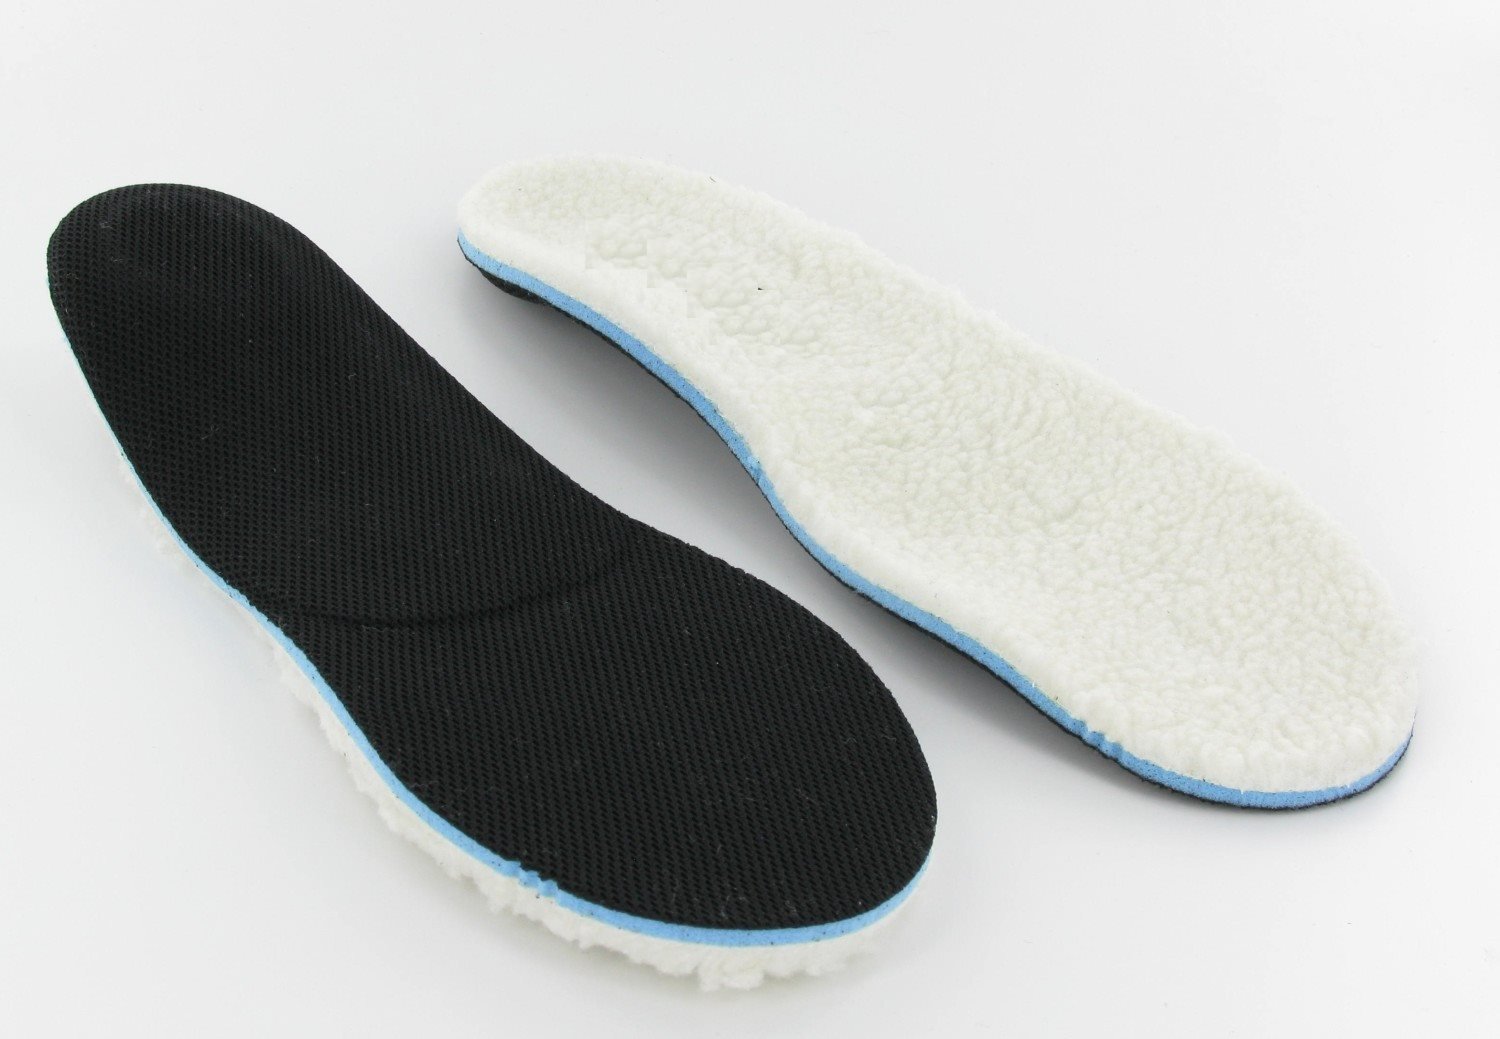 Australian Sheepskin Insoles Unisex Soft Warm Wool Insoles for Shoes Boots Slippers Wellies